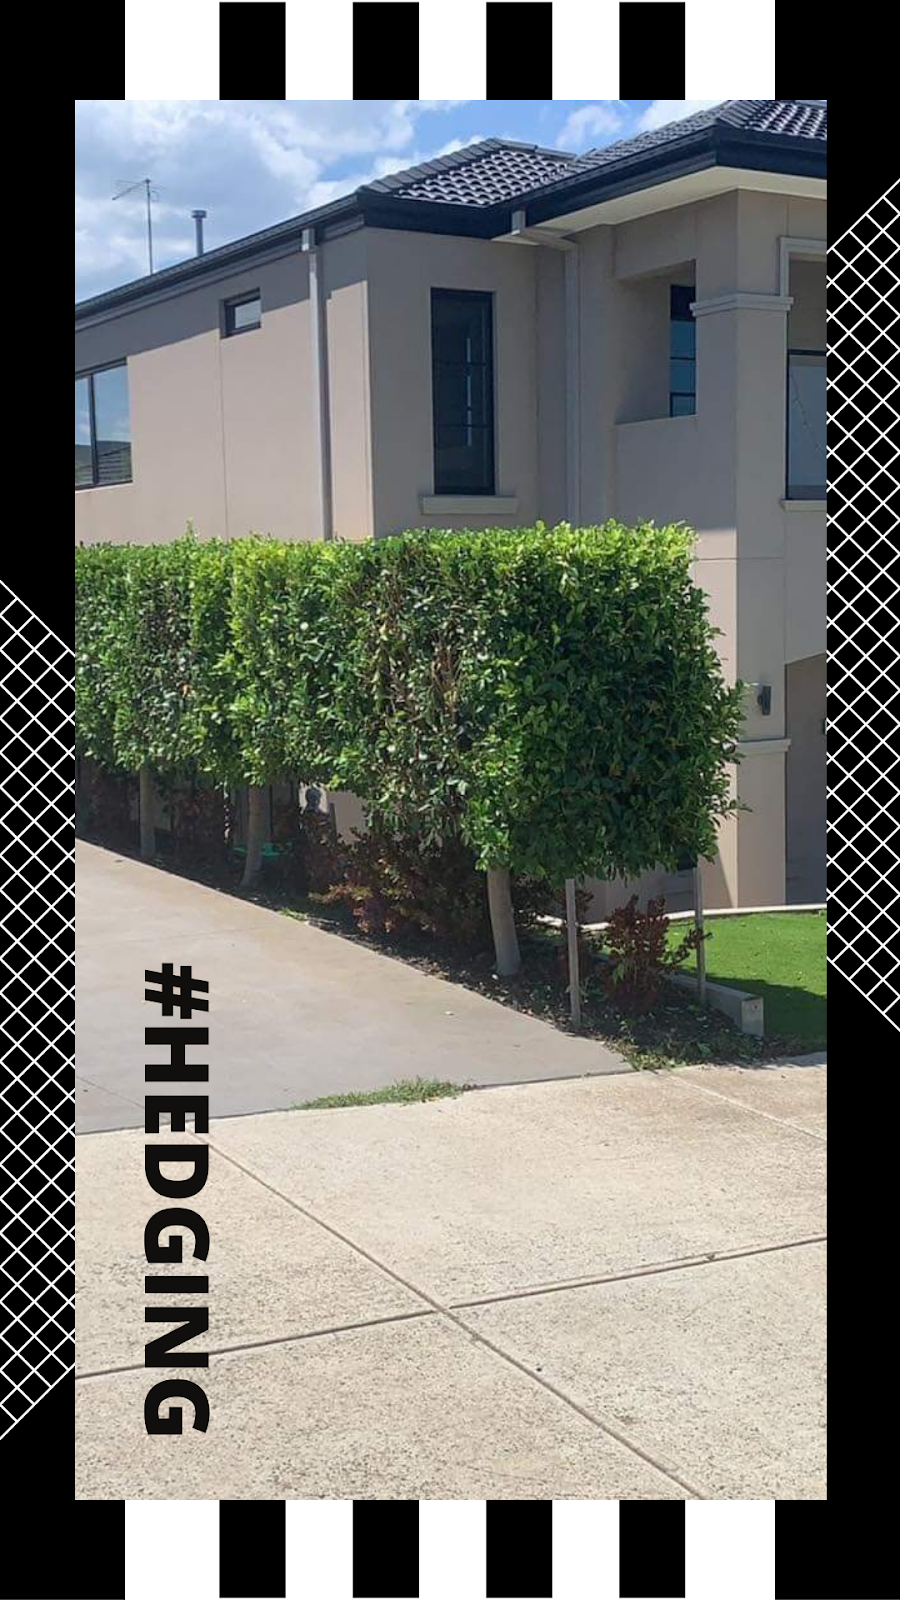 Darcys Professional lawn and landscaping care | general contractor | 70 Carrum Woods Dr, Carrum Downs VIC 3201, Australia | 0439653124 OR +61 439 653 124